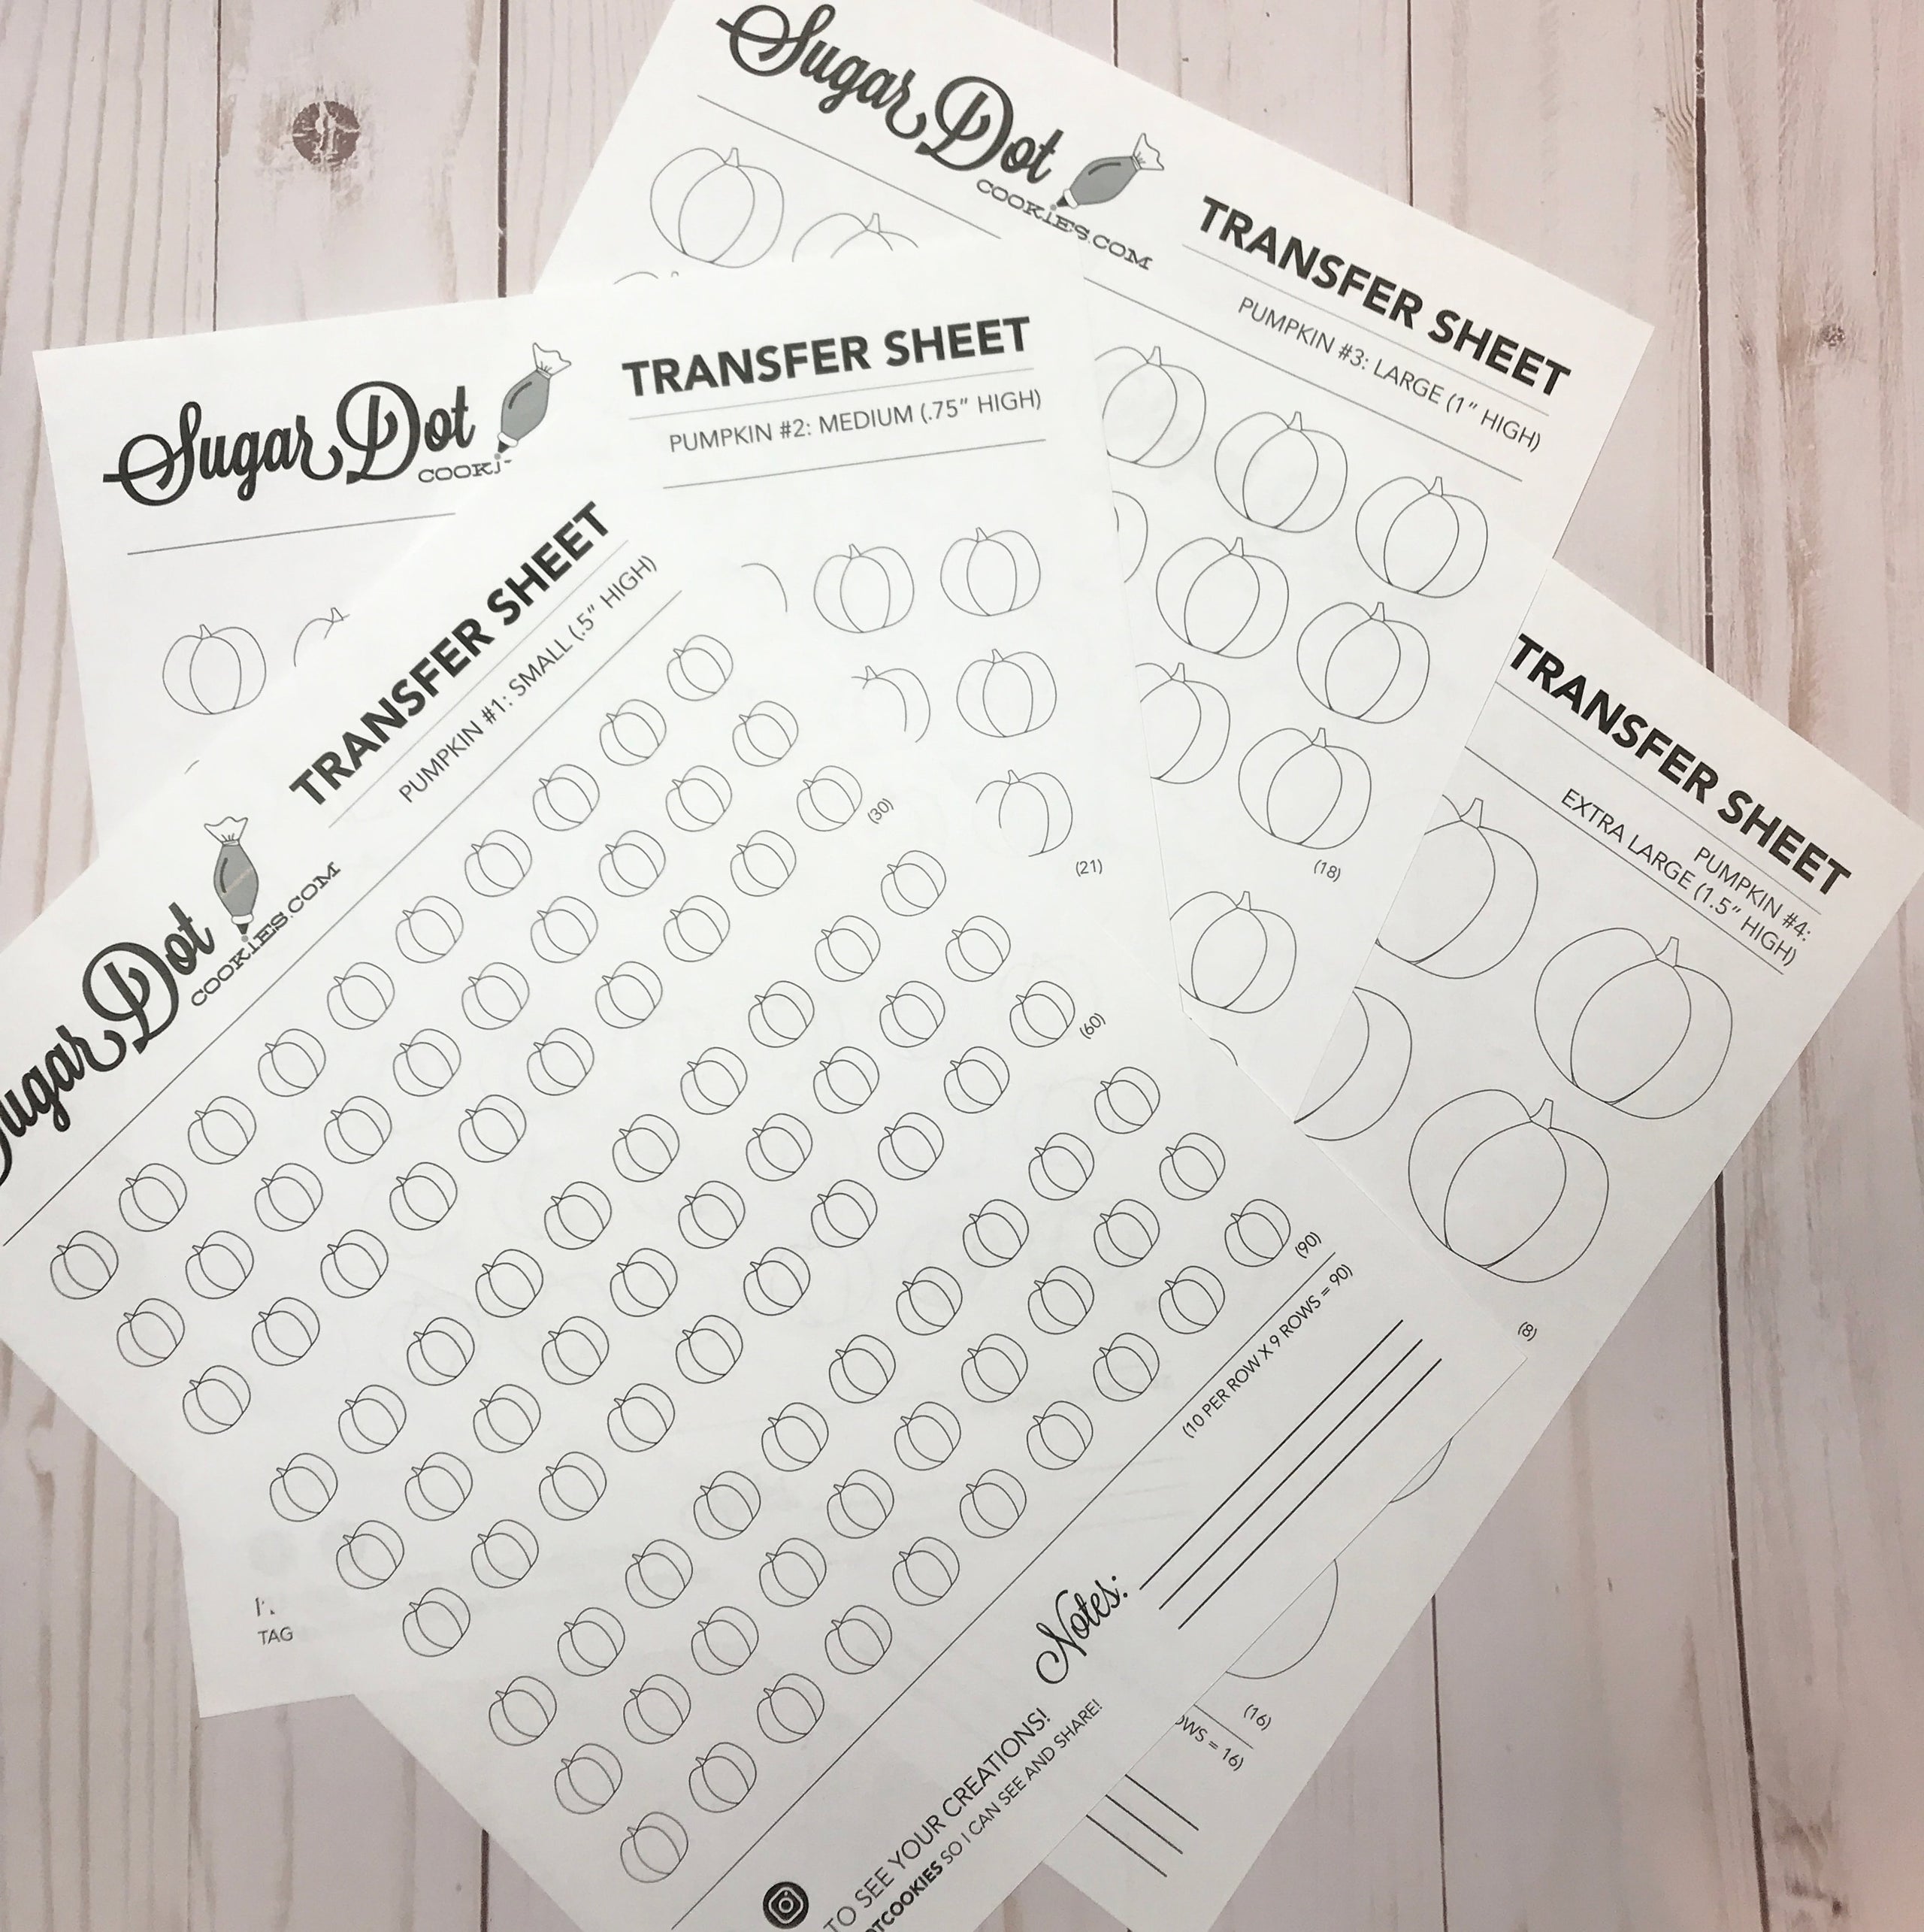 Template Transfer Sheets to Make Royal Icing Transfers - Leaves